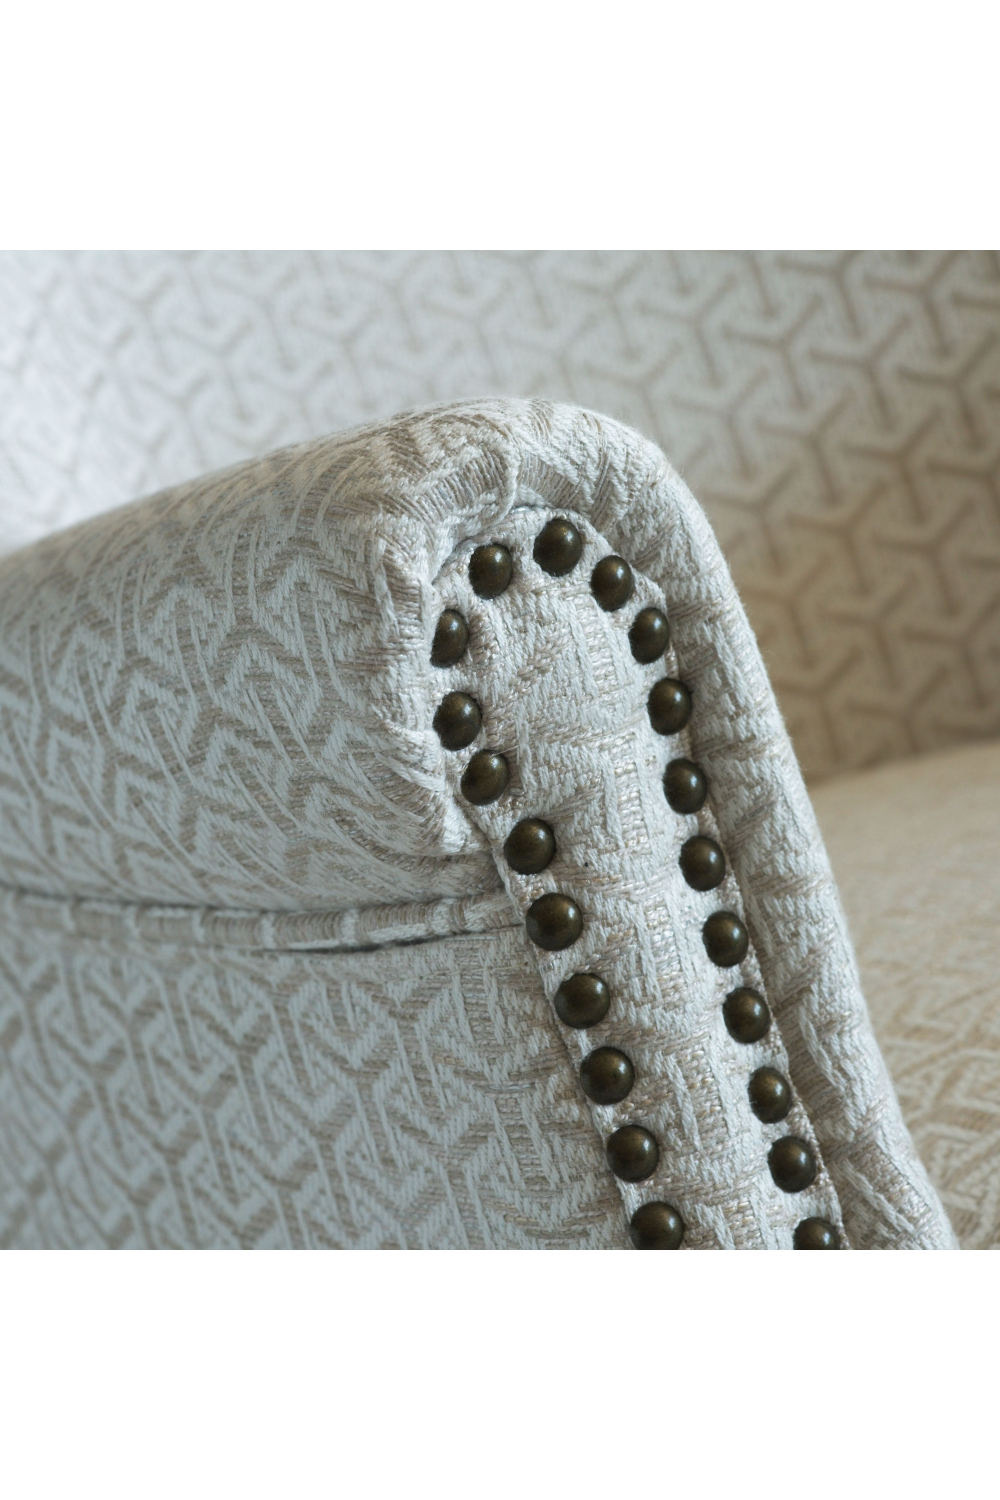 Rollover Arm Studded Accent Chair | Andrew Martin Greyhound | Oroa.com